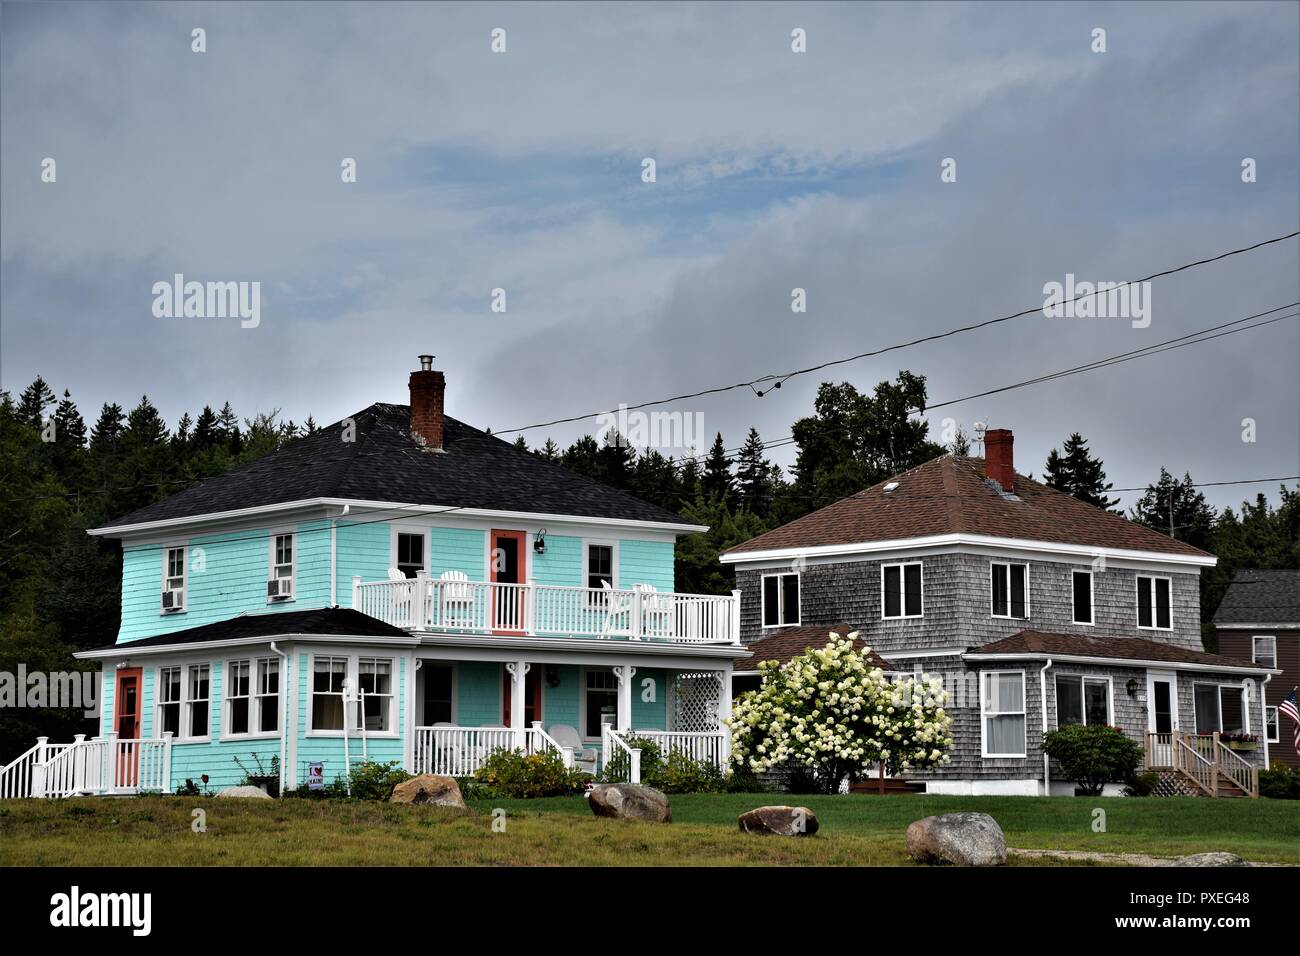 new england houses multiple places Stock Photo